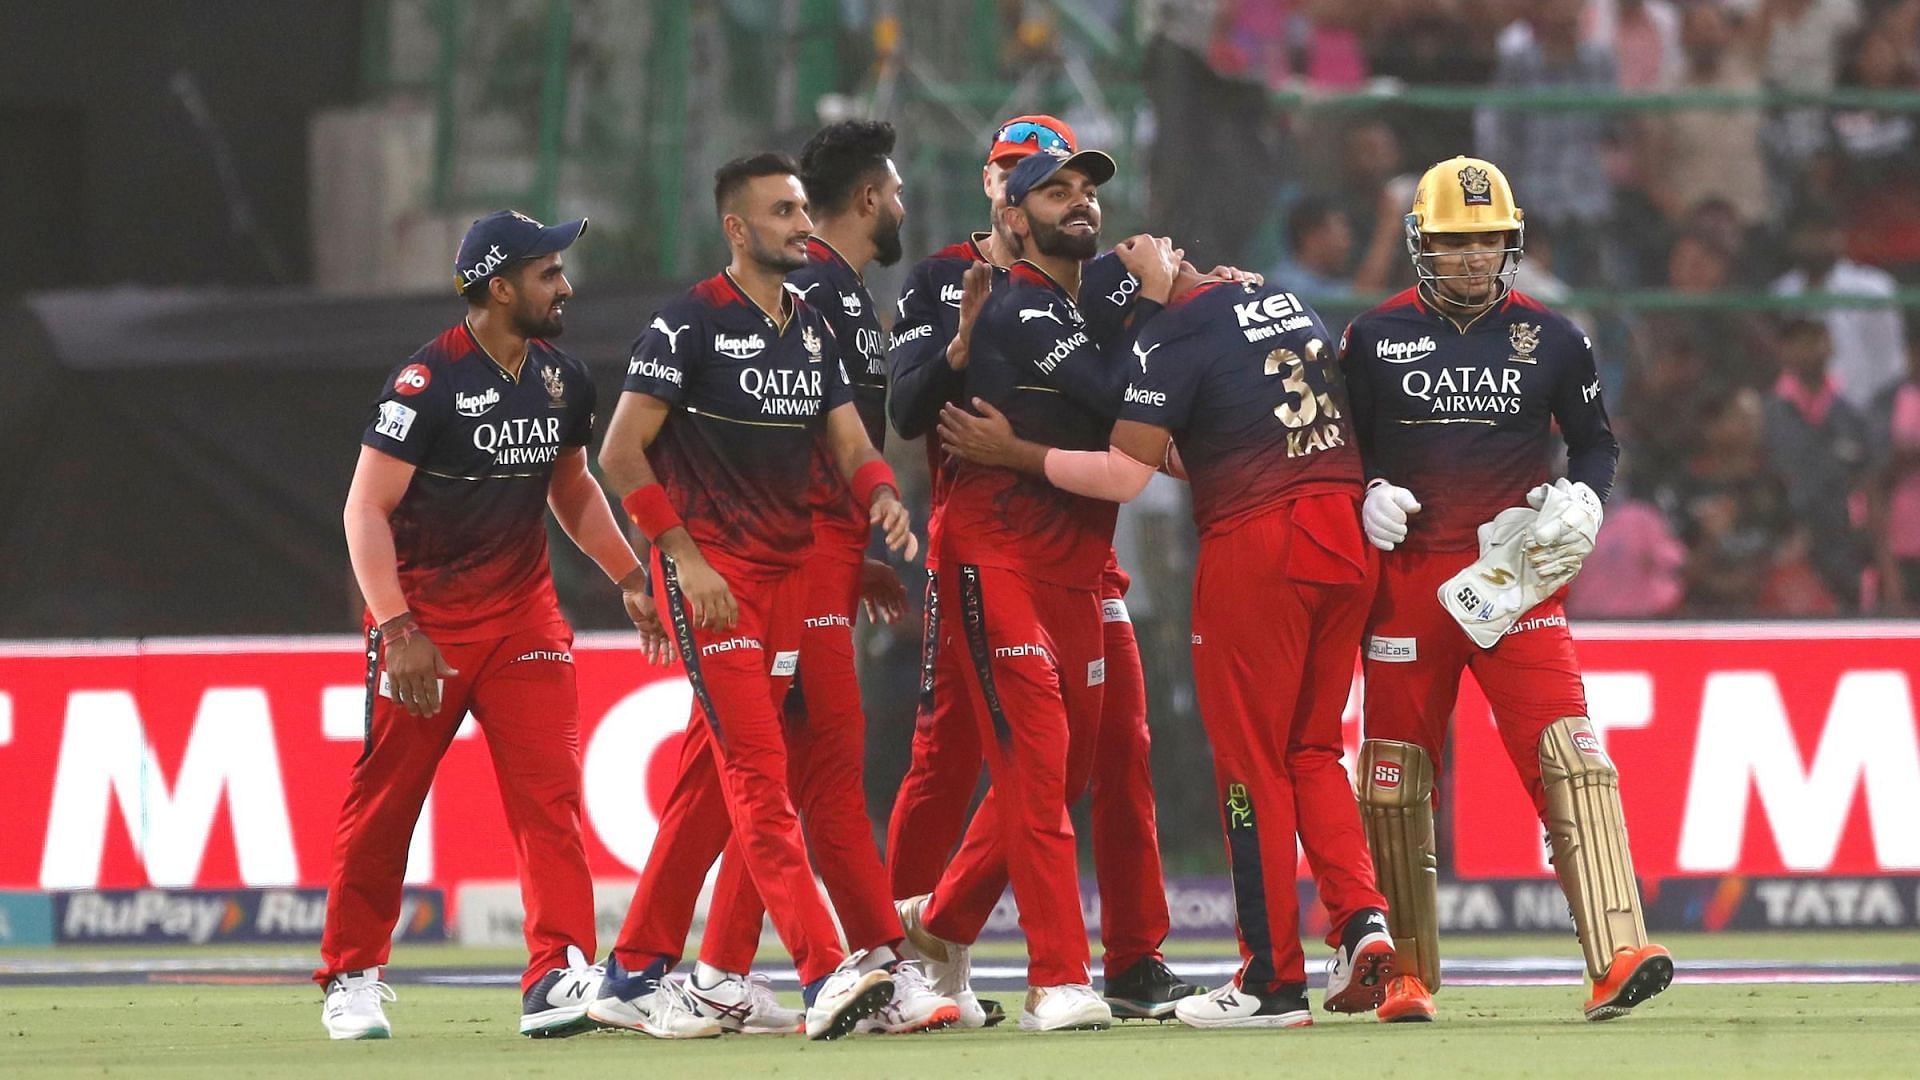 RCB have concerns with their bowling department ahead of the IPL season.